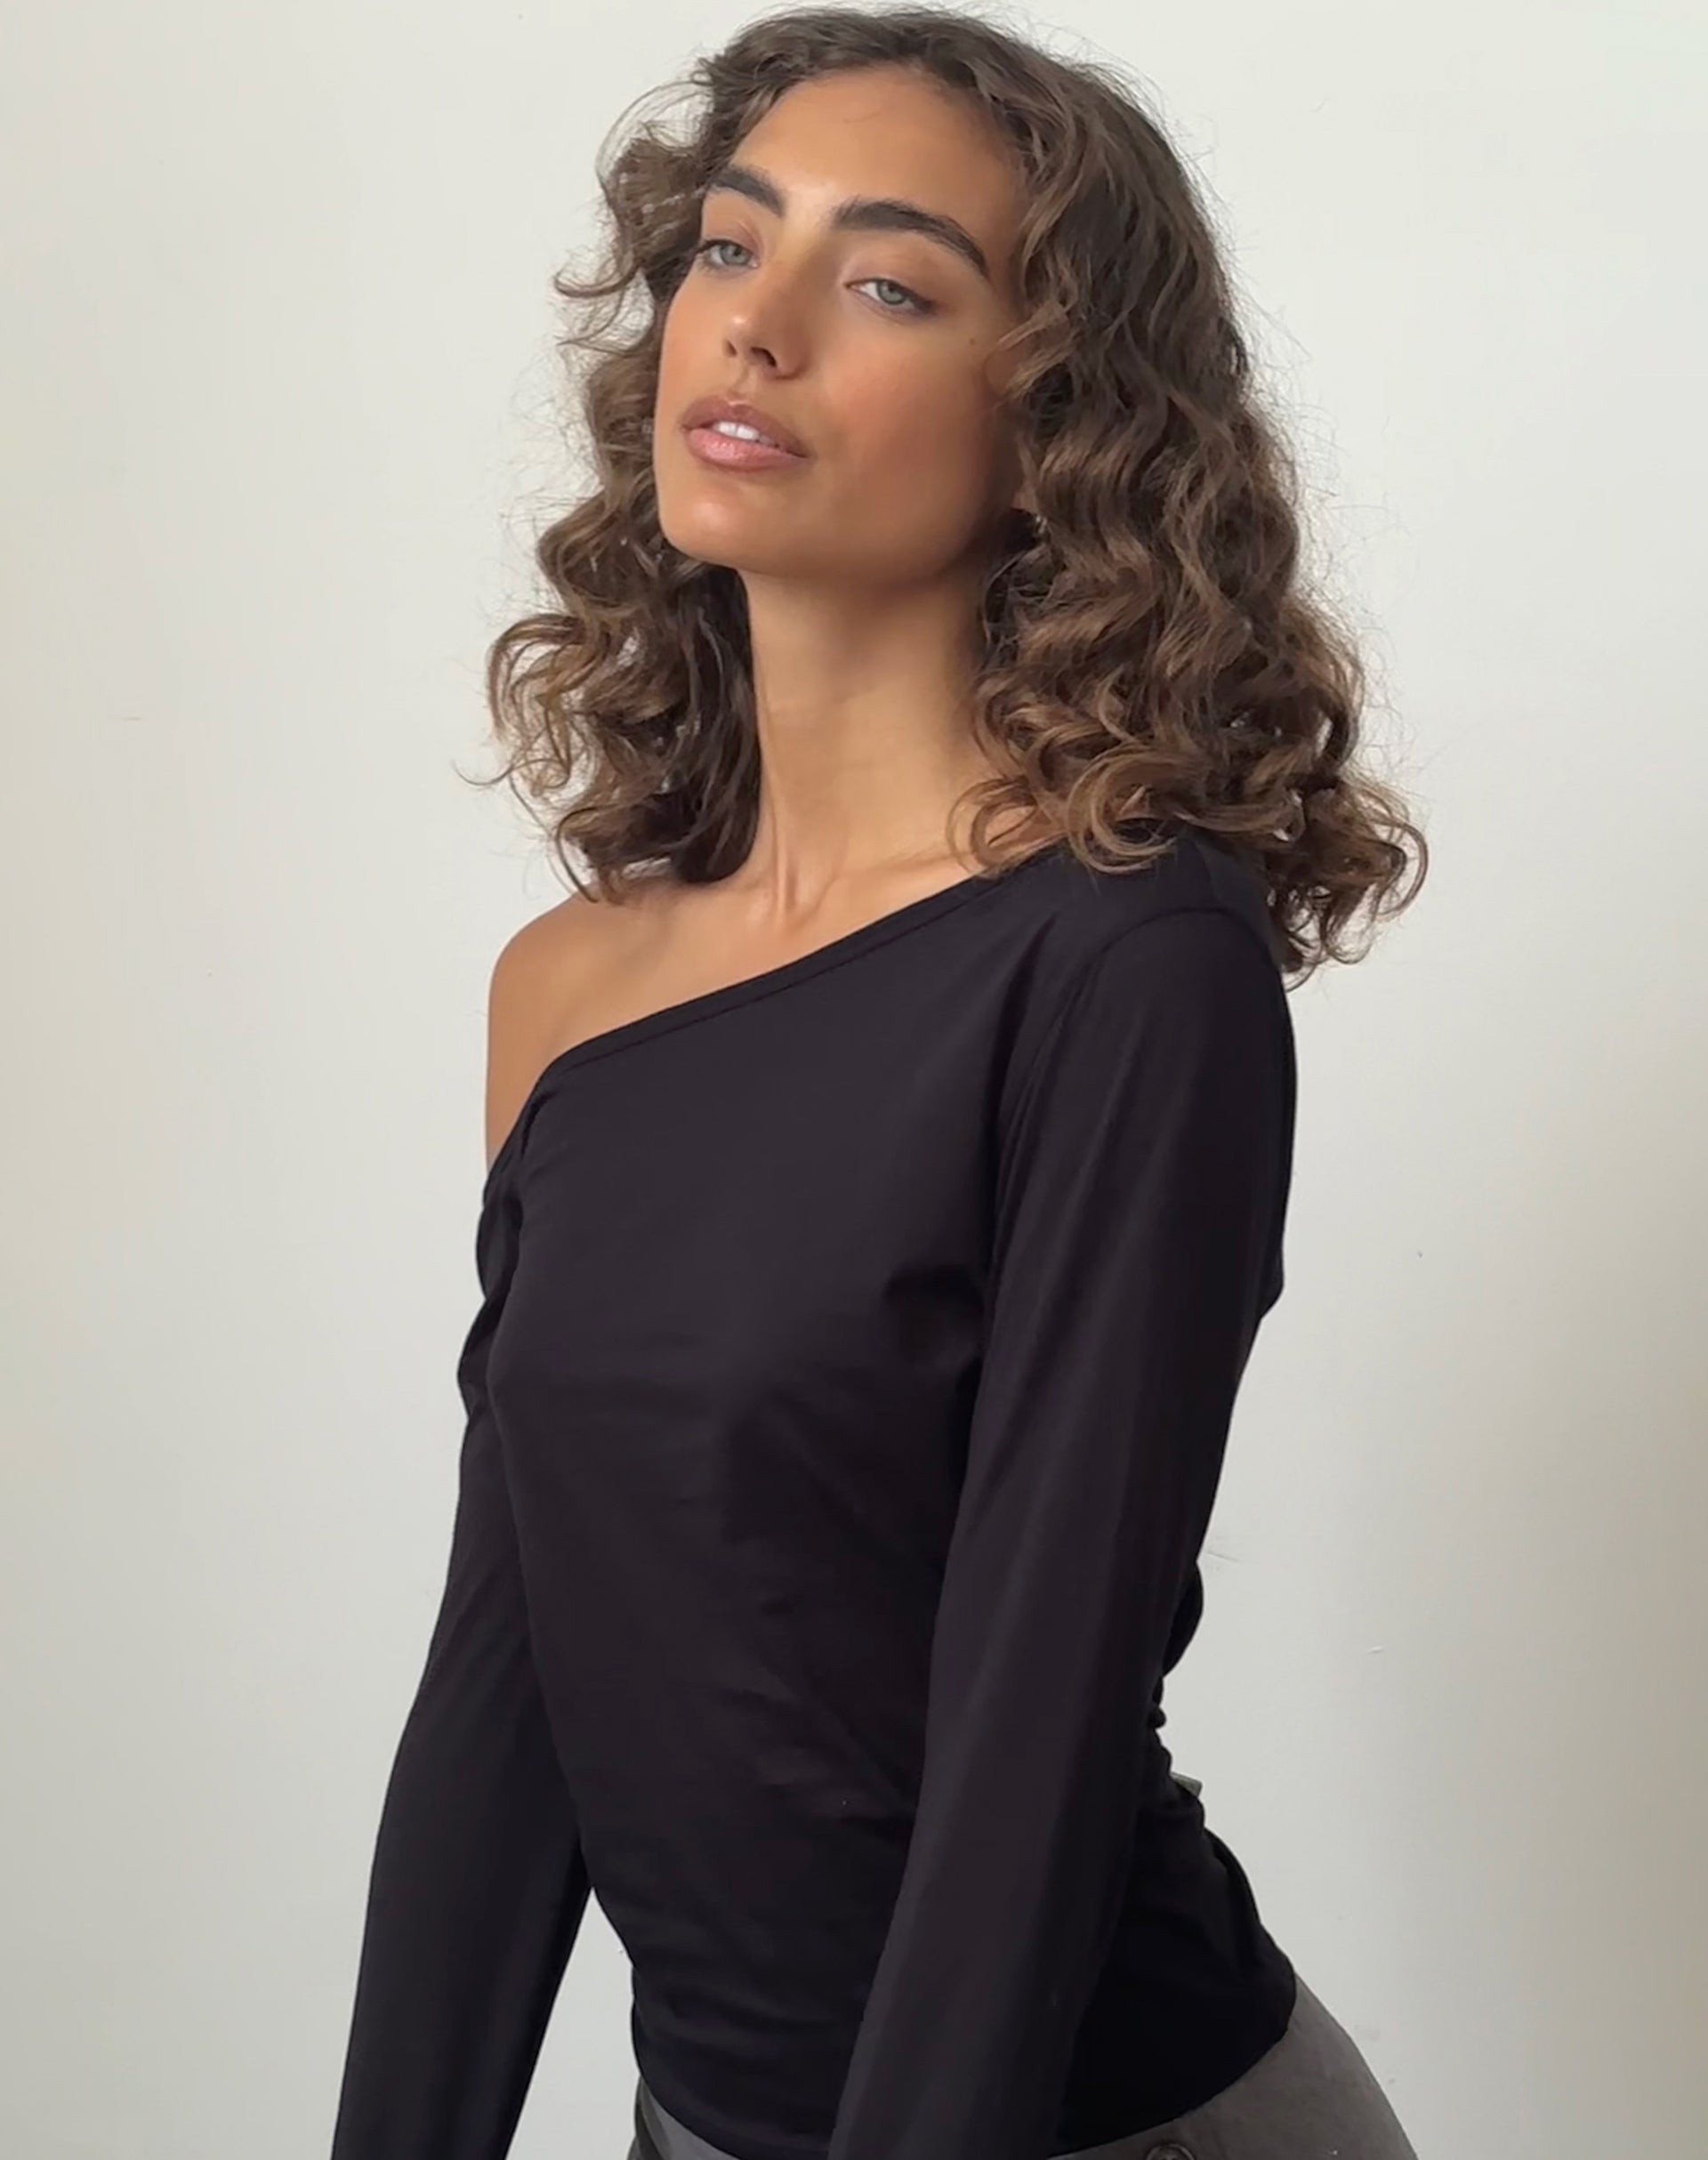 Image of Ledez Asymmetrical Slouchy Top in Black Tissue Jersey